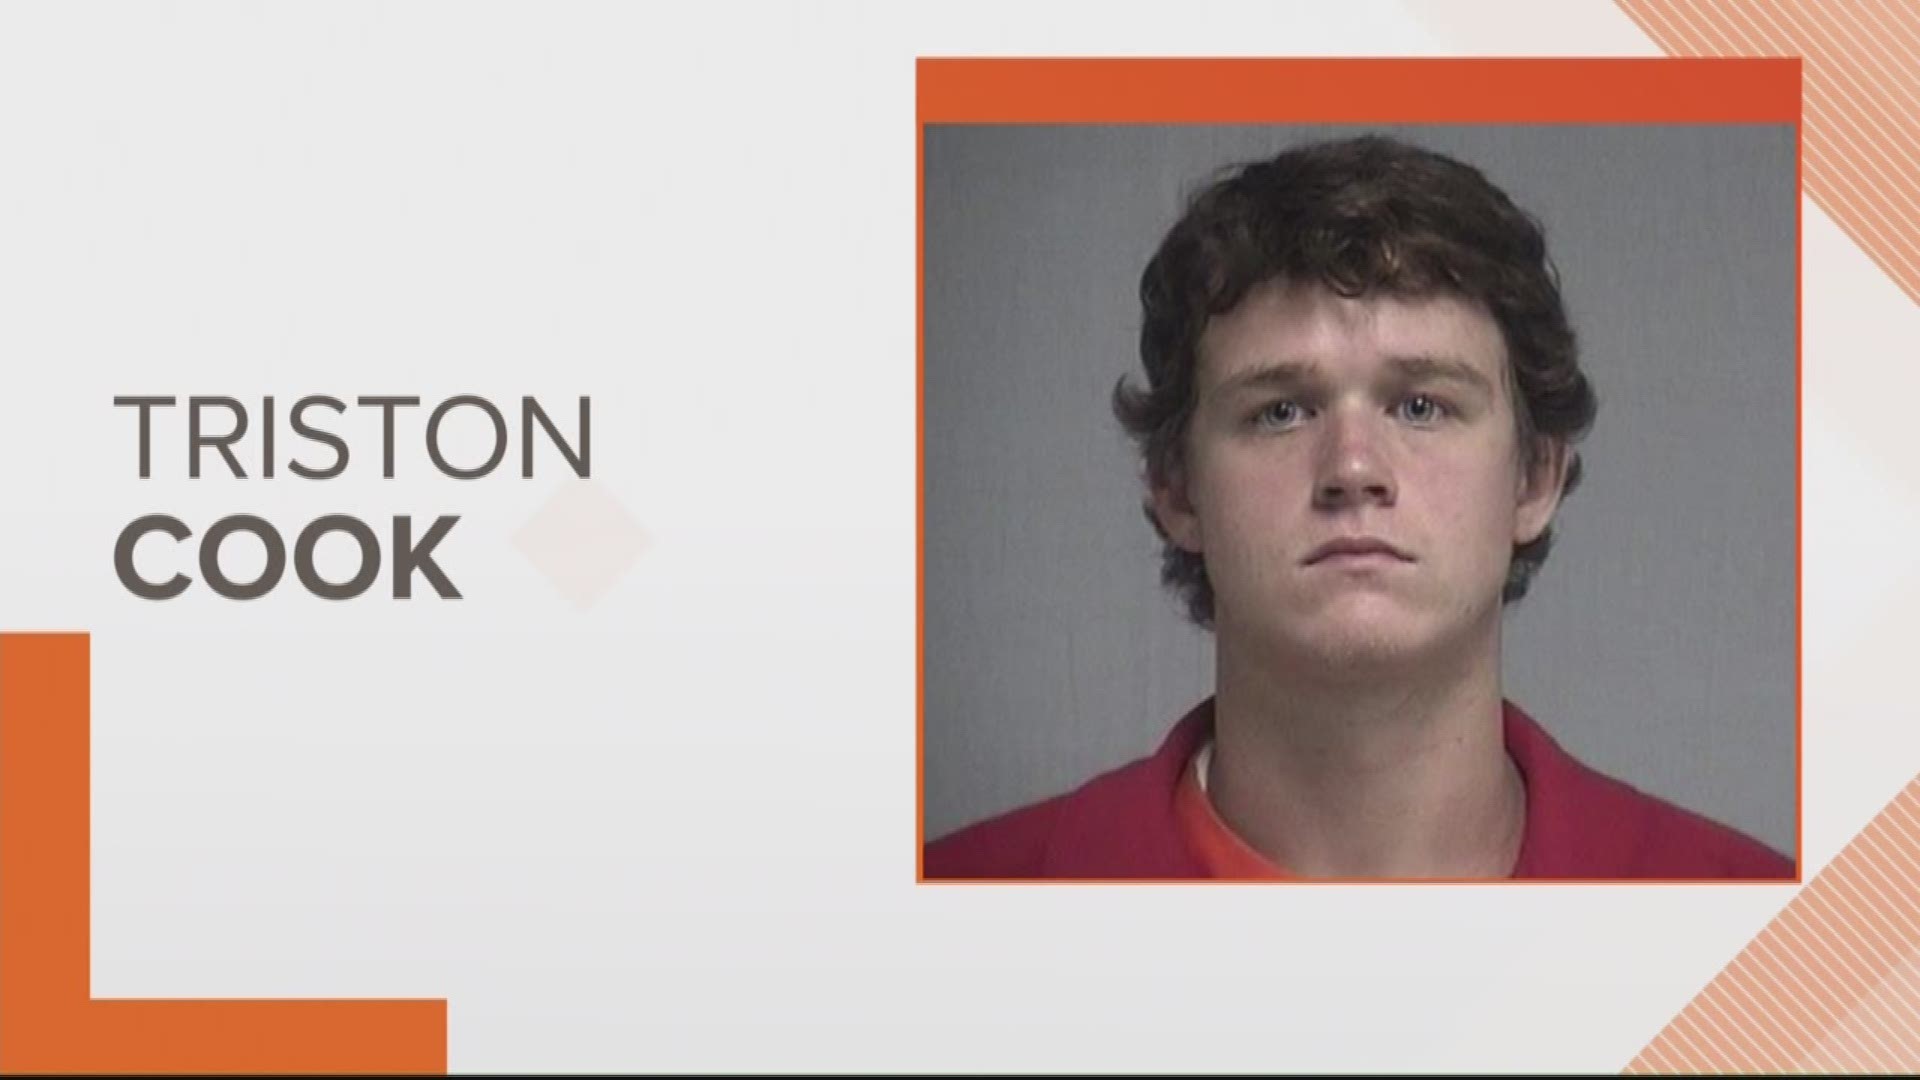 Triston Cook is currently being held at the Nassau County jail on a $2,500 bond.